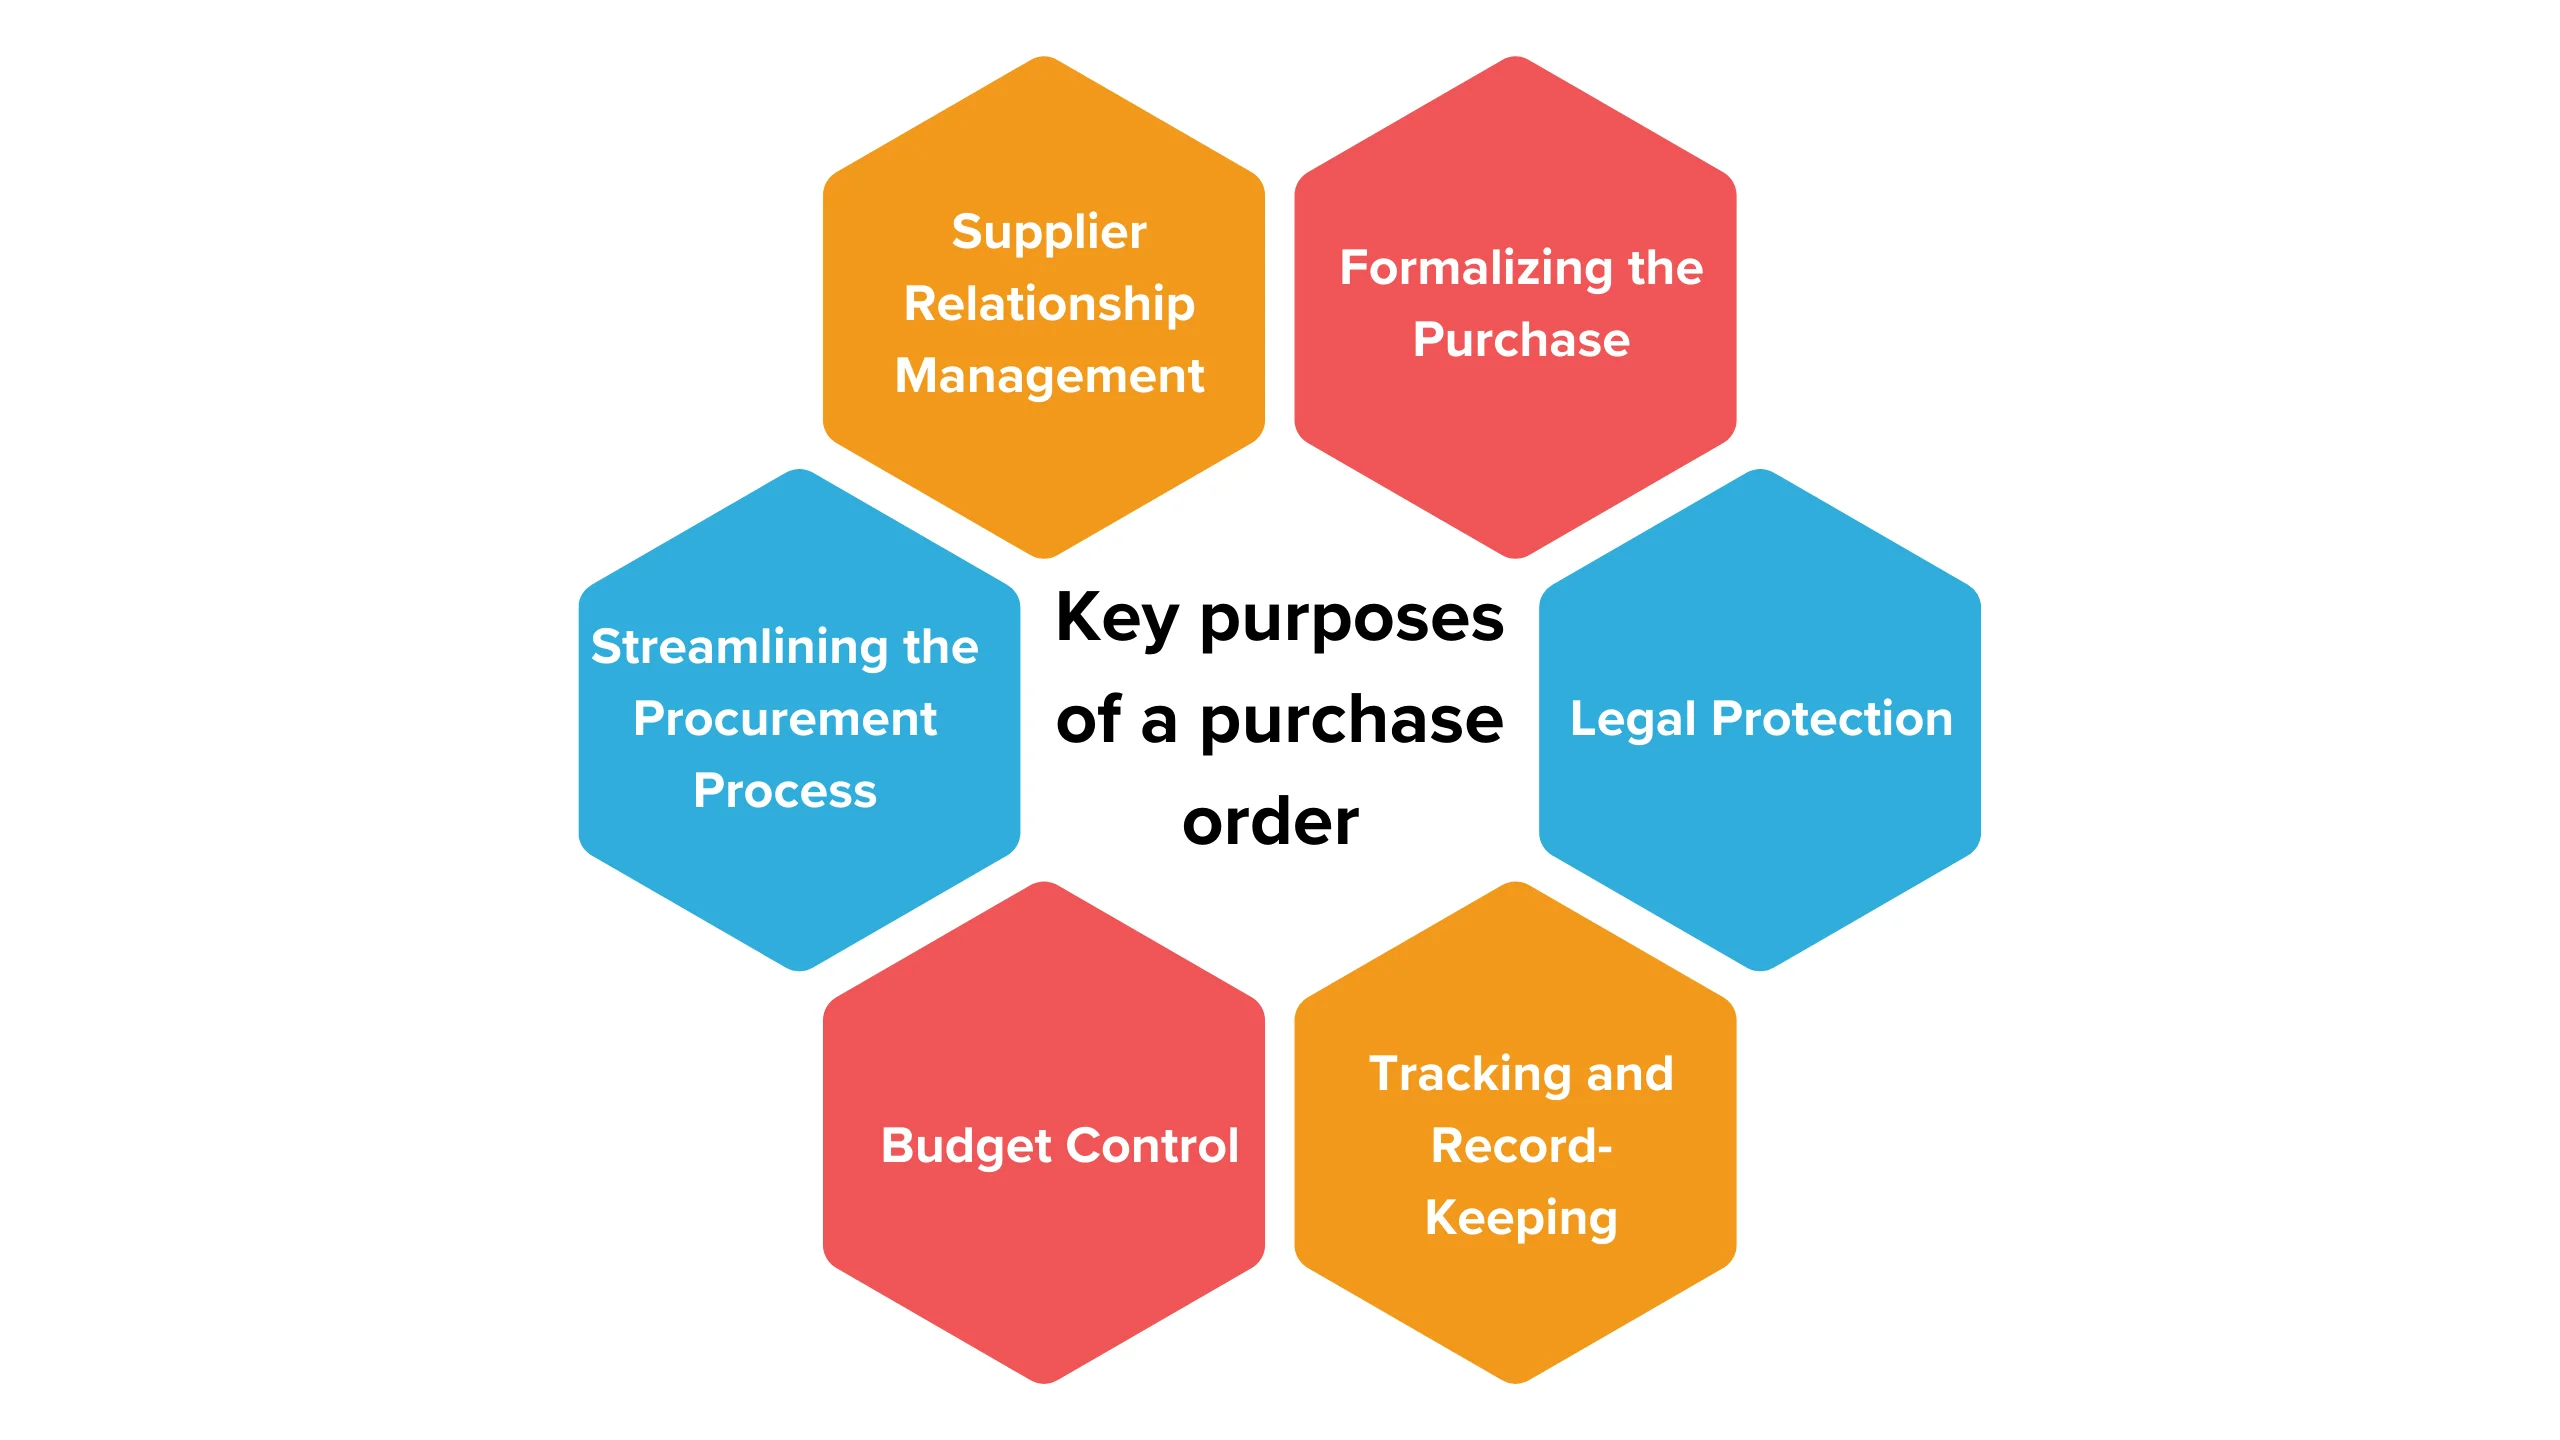 The purpose of a purchase order (PO) is to serve as a legally binding document that outlines the specific terms and conditions of a transaction between a buyer and a seller.